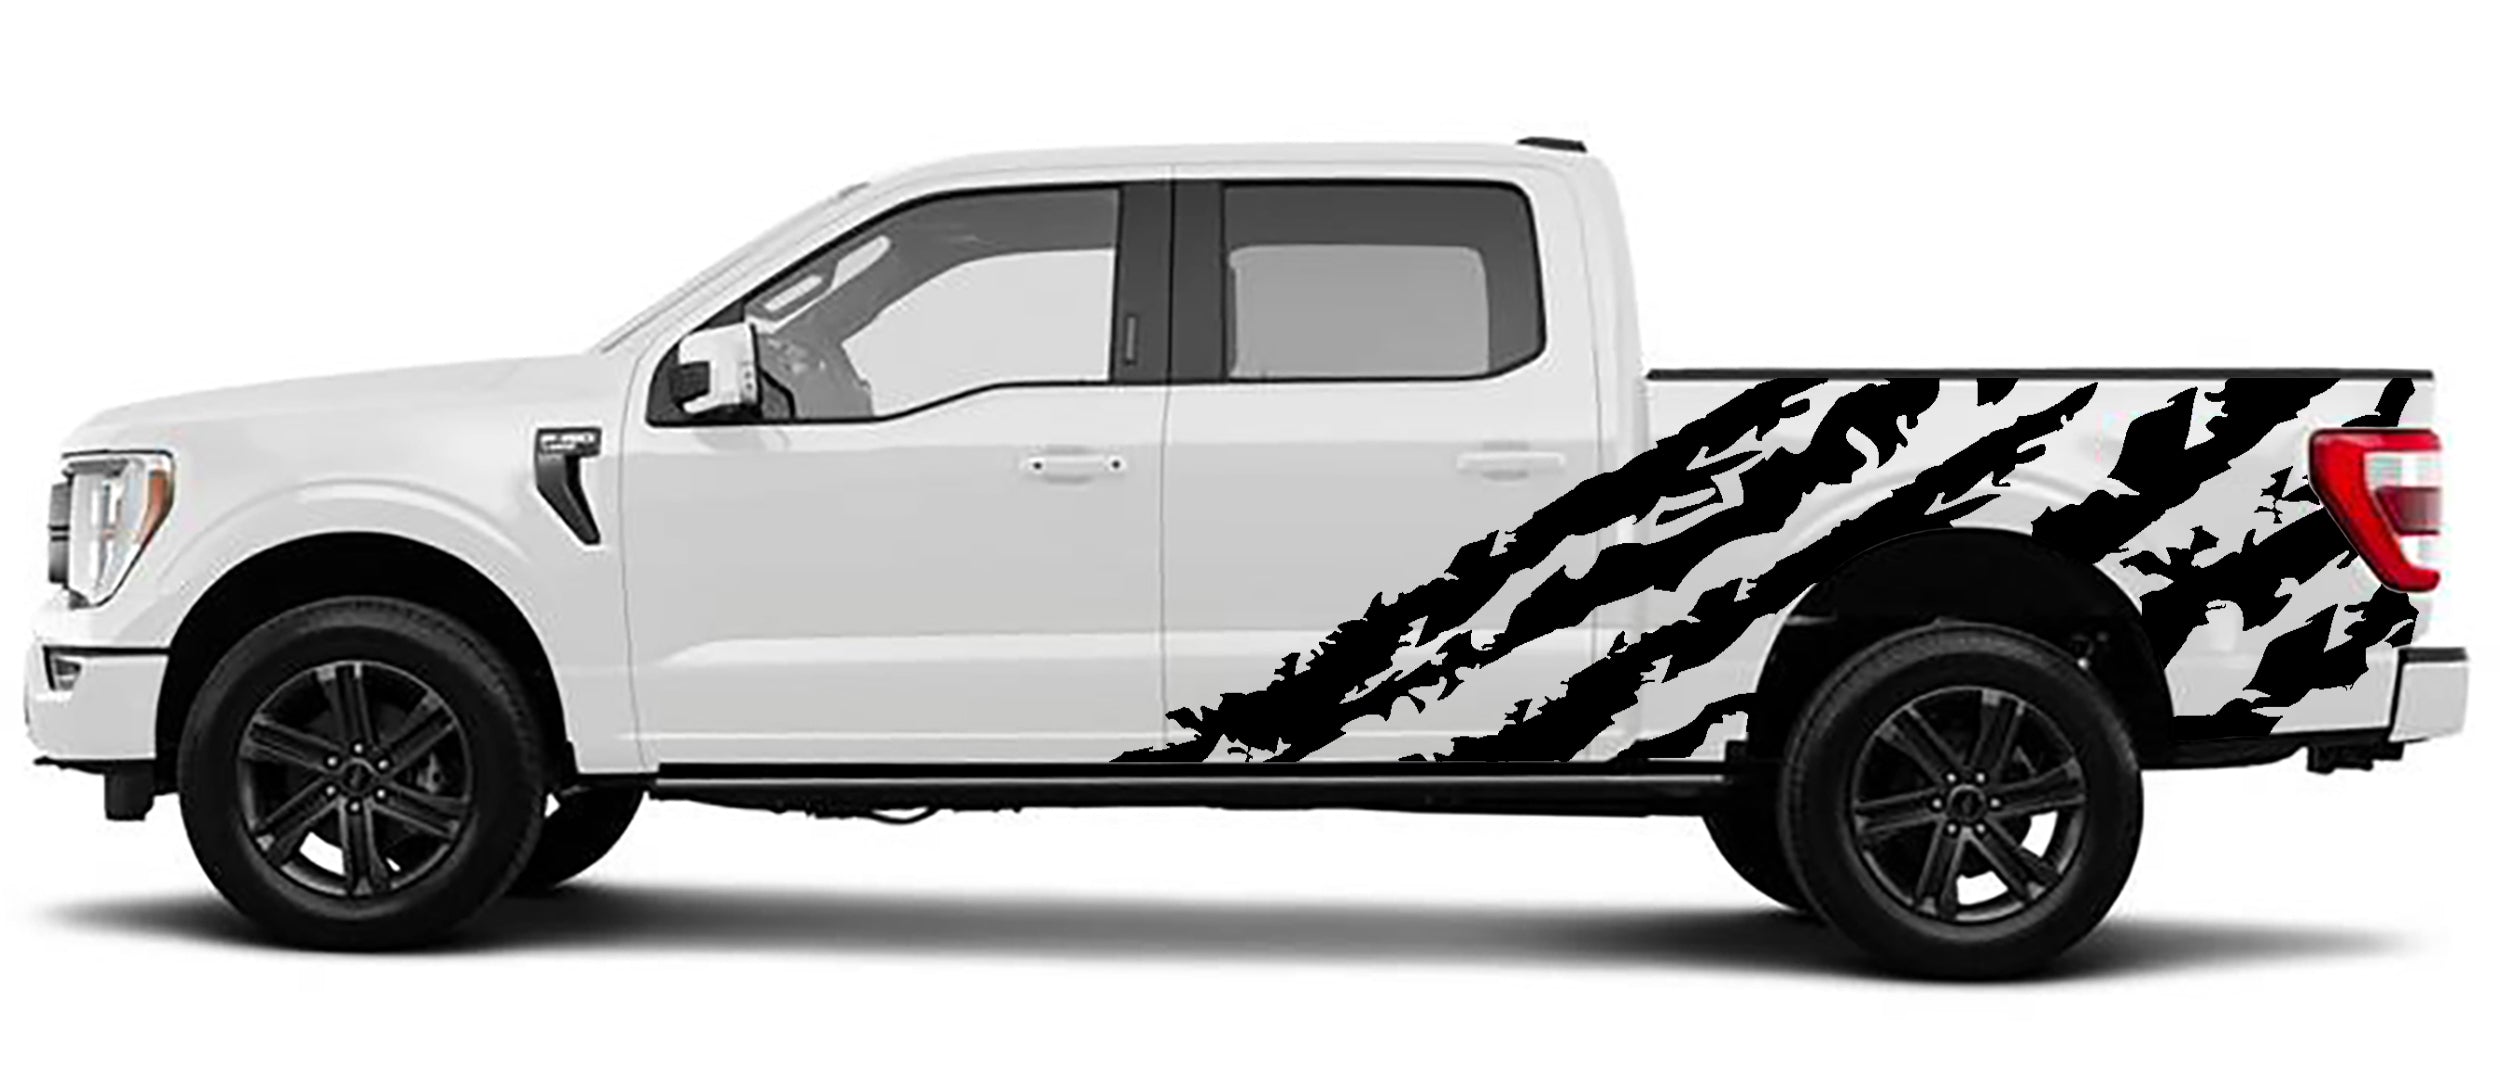 Ford F-150 Shred Side Decals (Pair) : Vinyl Graphics Kit Fits (2021-2023)